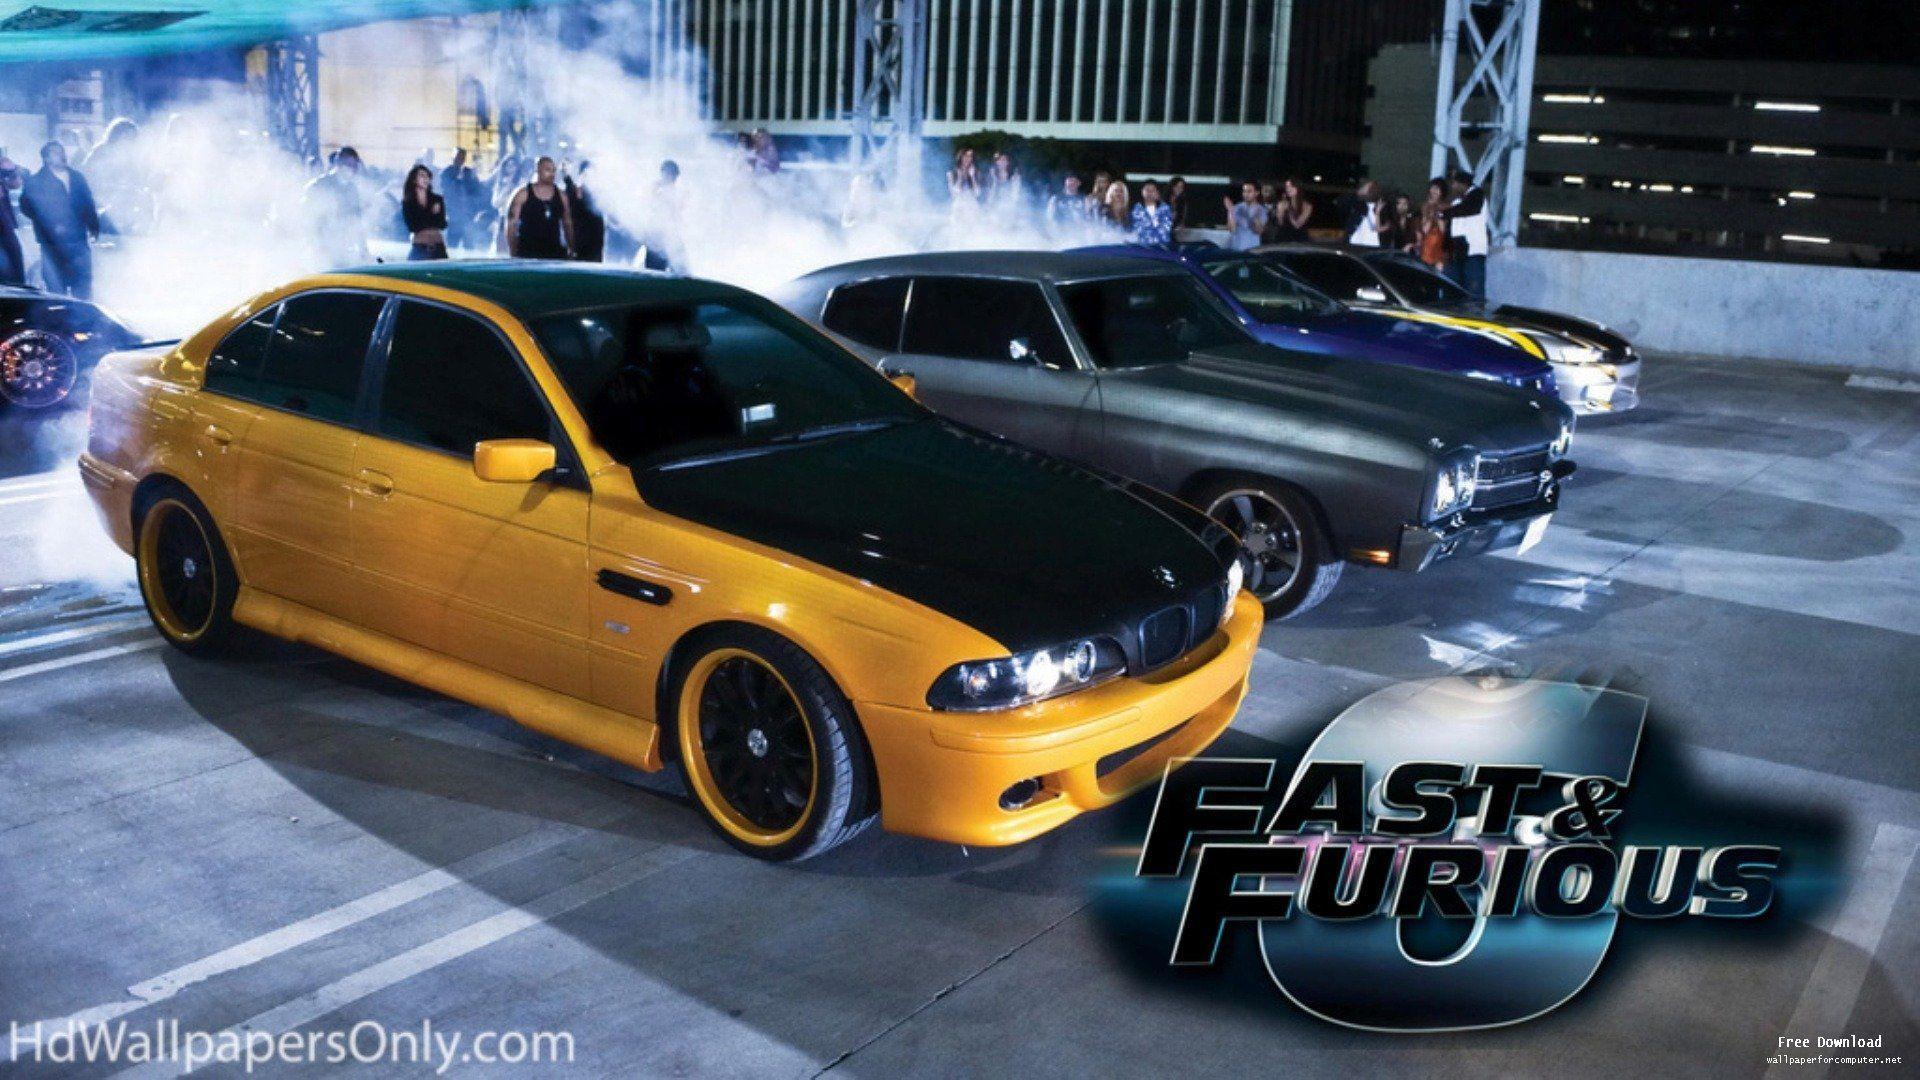 Fast And Furious Cars Wallpapers Hd Cool 7 HD Wallpapers